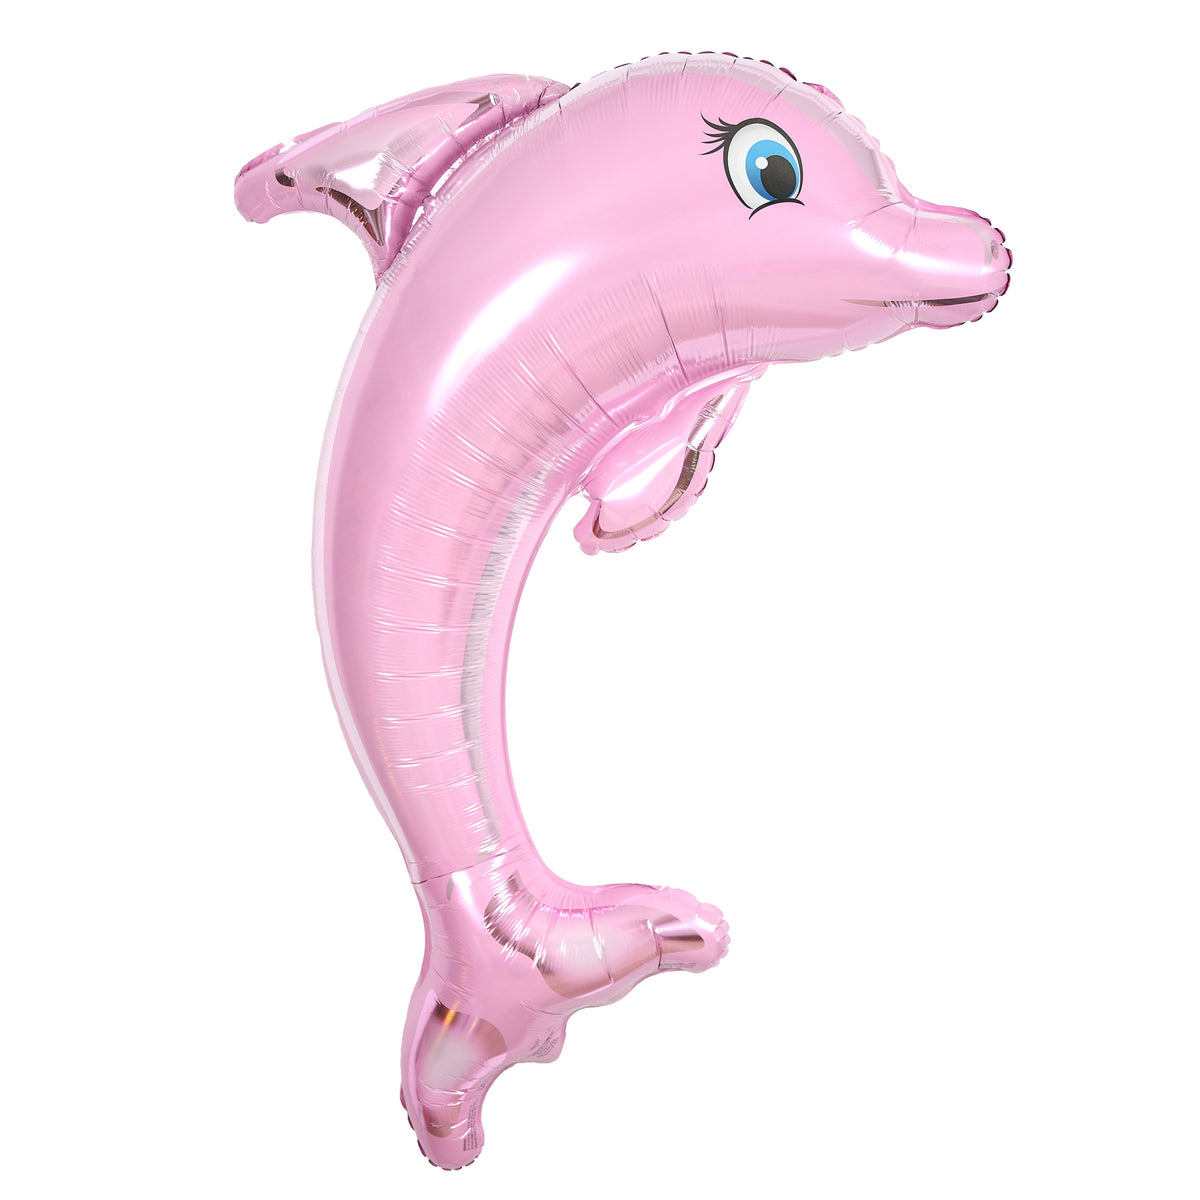 Flying Dolphin Balloons - The Sweetest Thing Confection Party